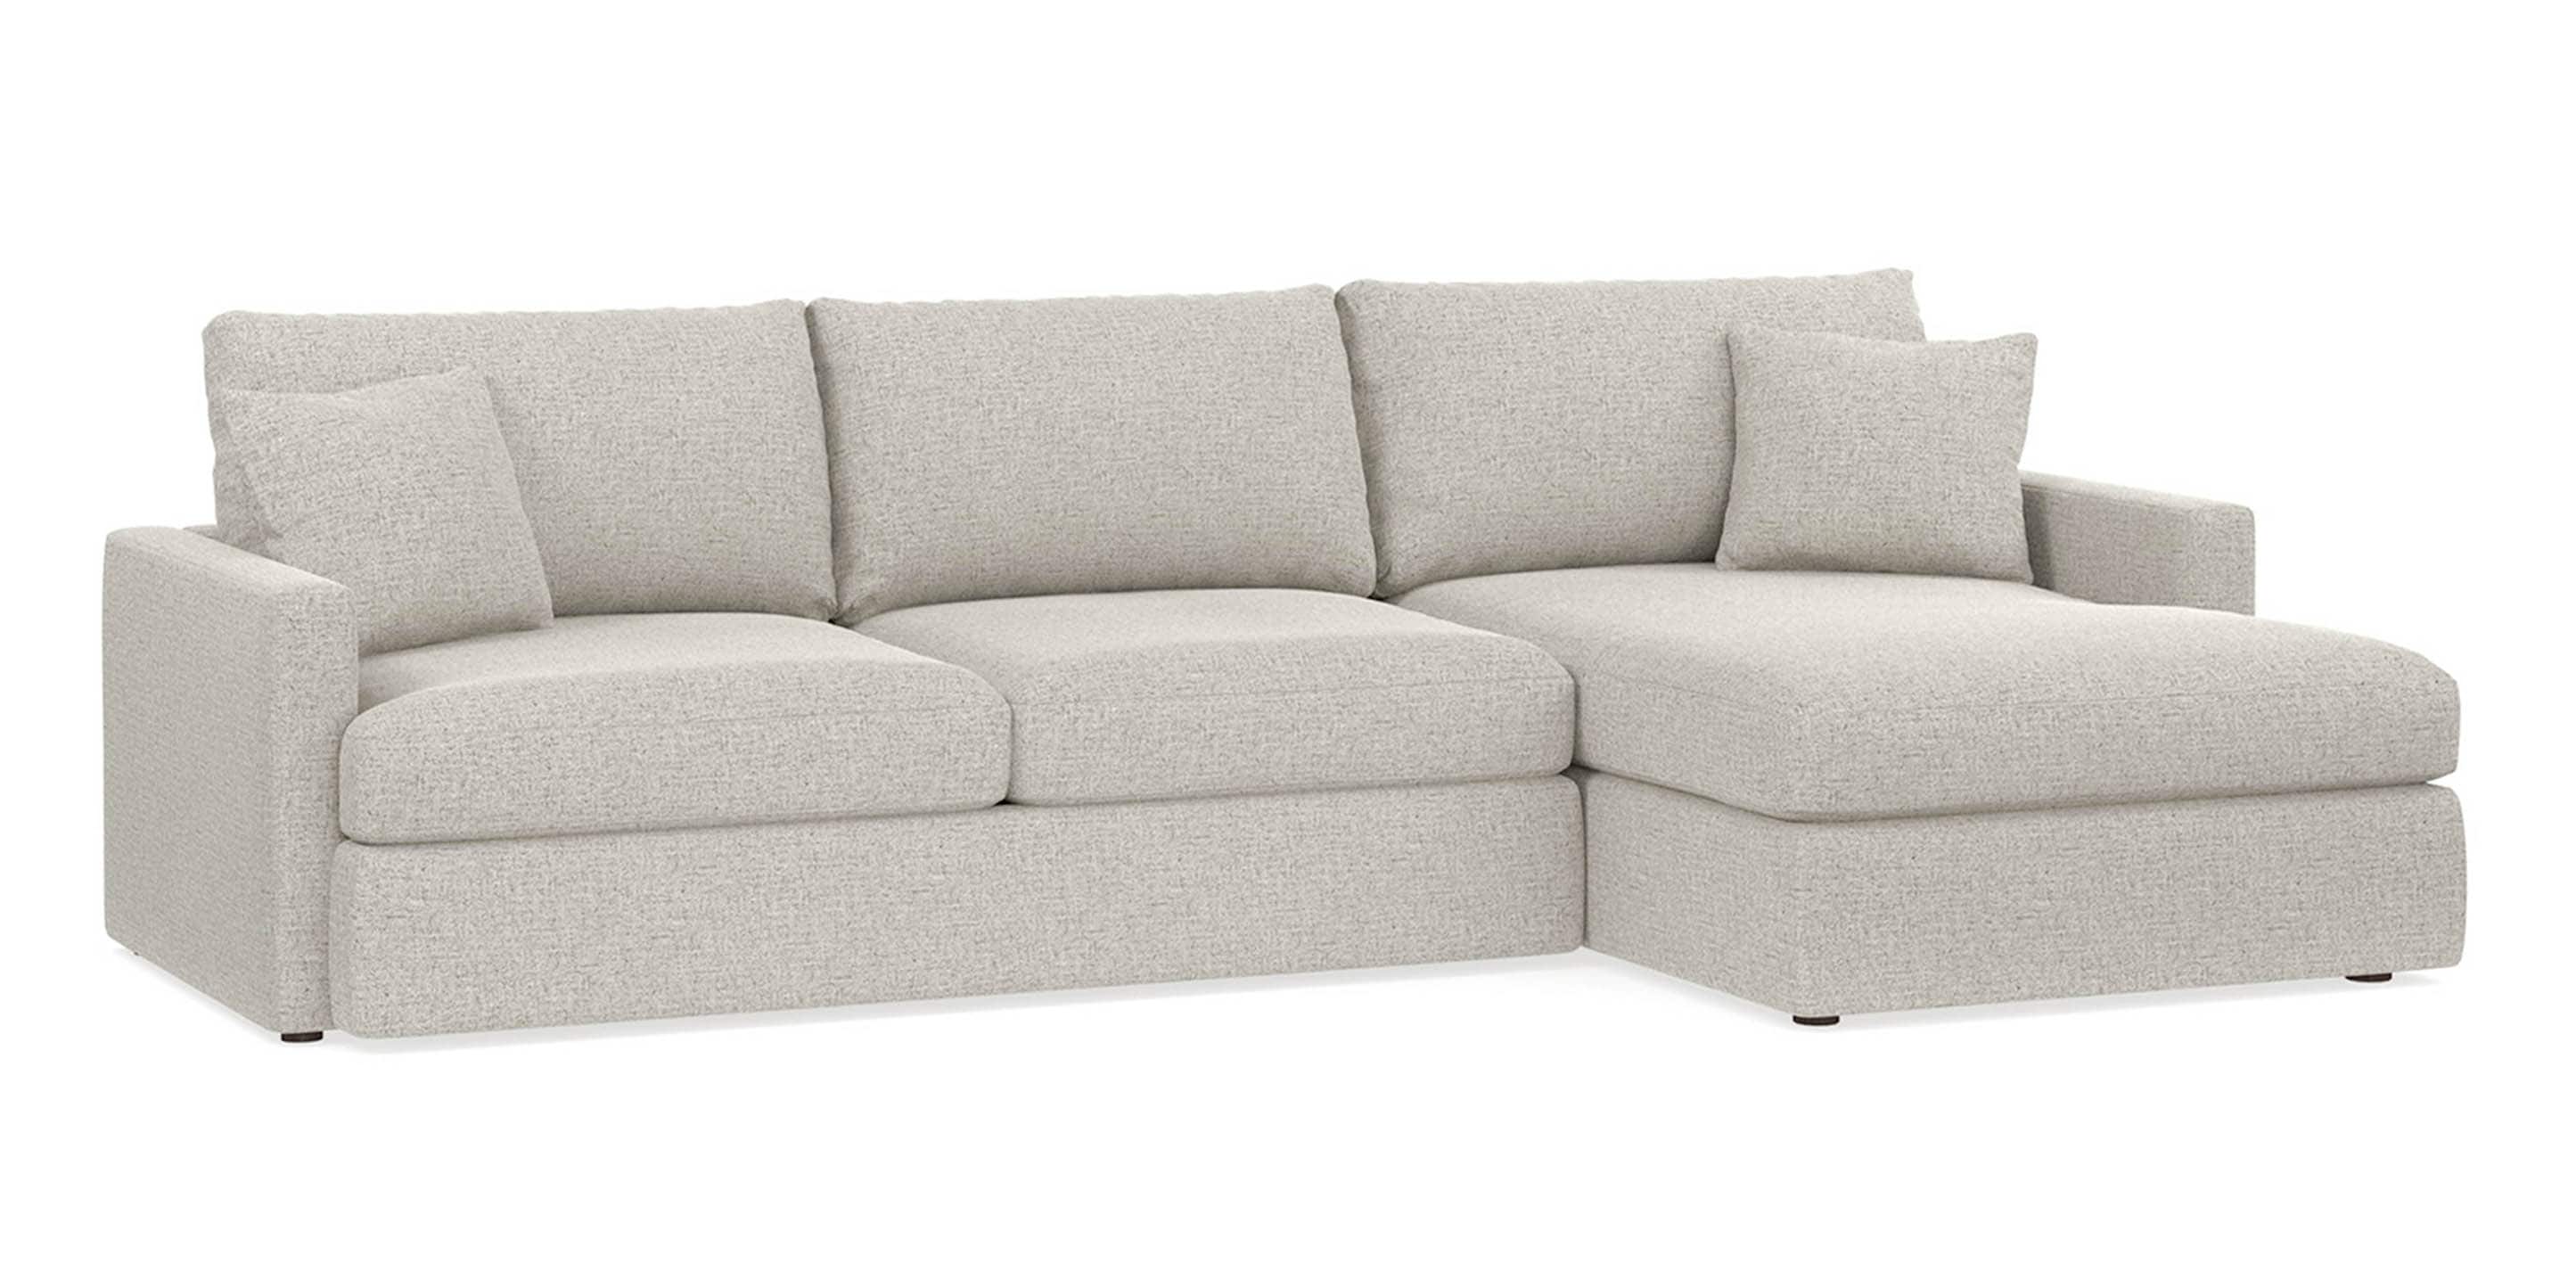 Allure Sectional